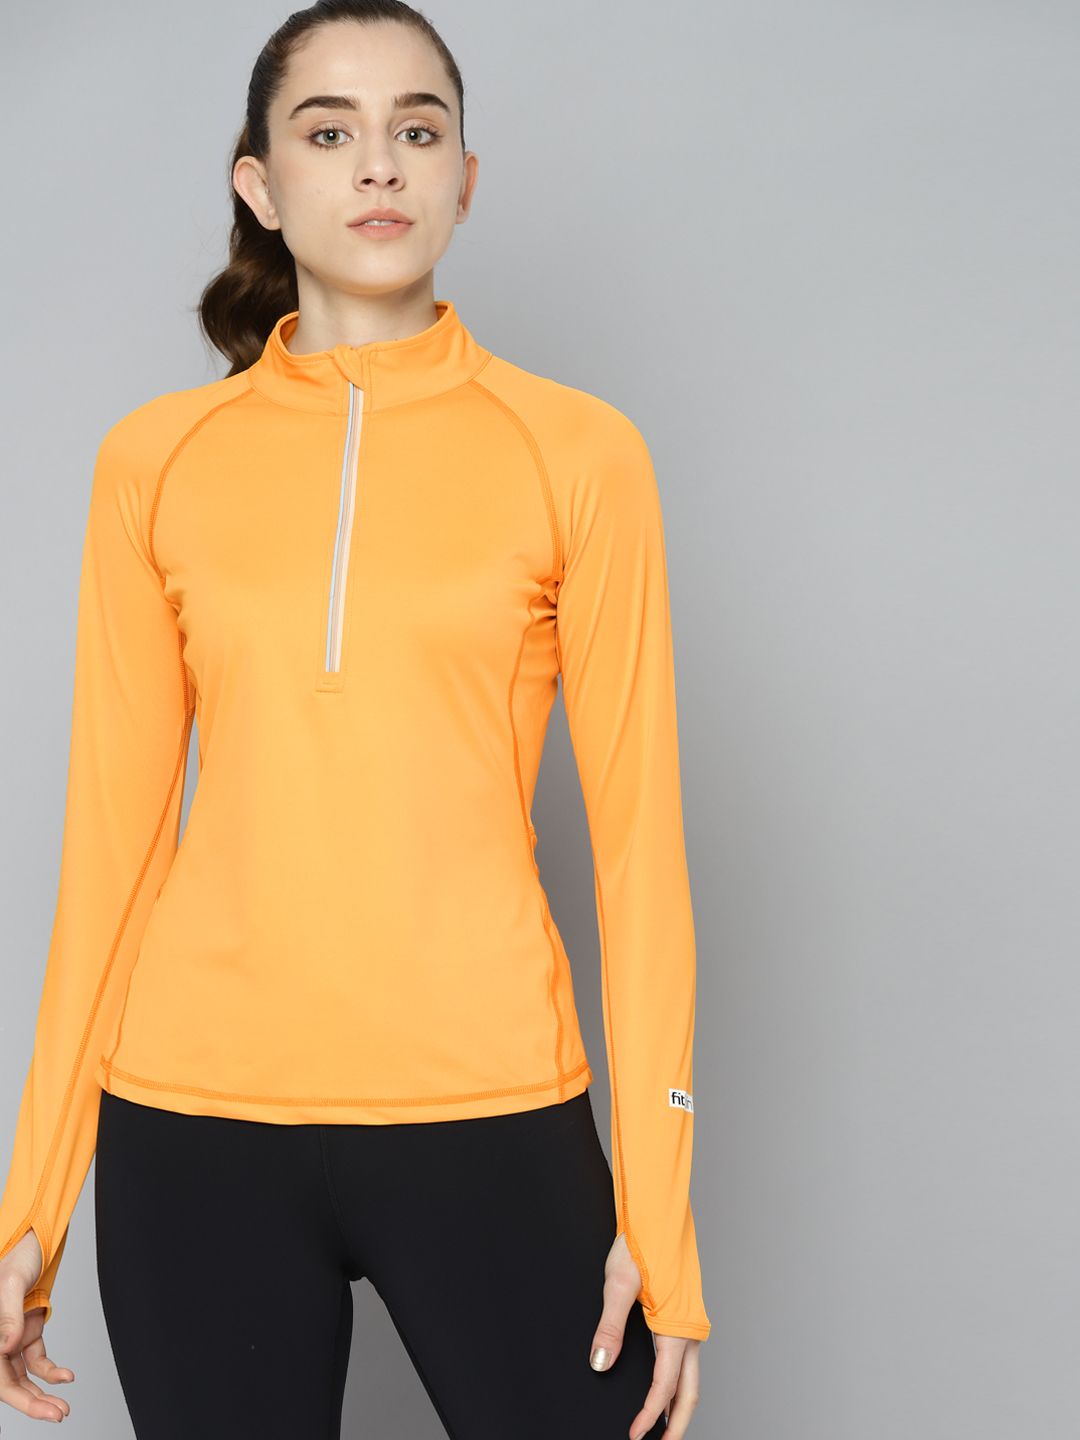 Fitkin Women Yellow High Neck Training T-shirt Price in India